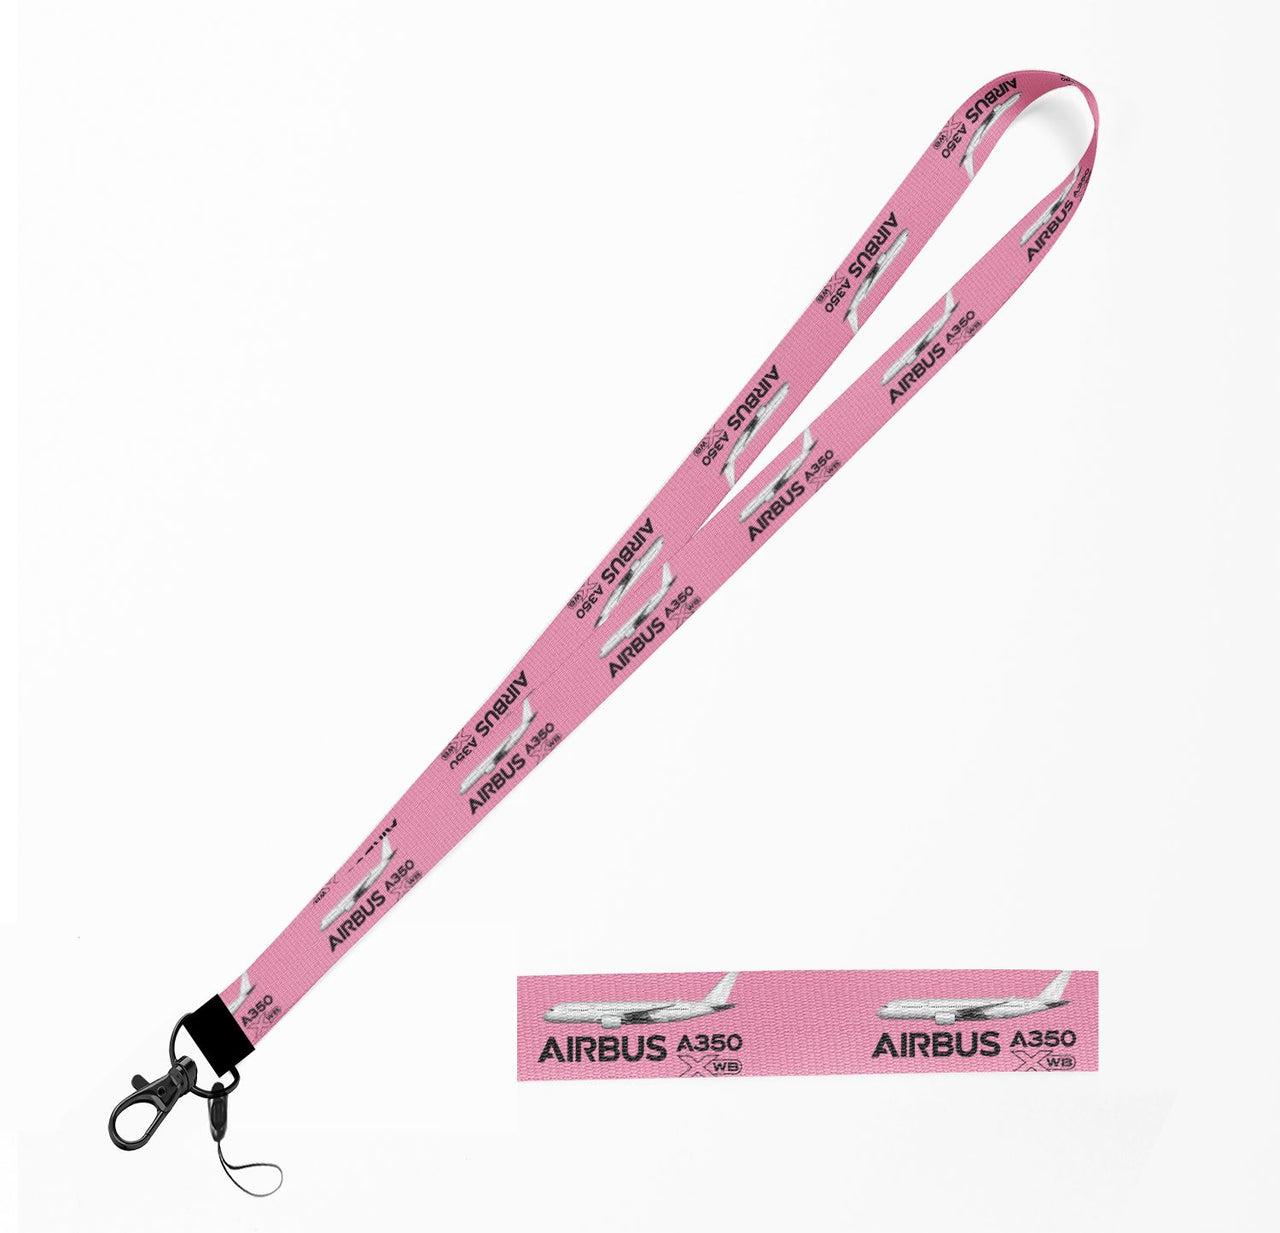 The Airbus A350 WXB Designed Lanyard & ID Holders